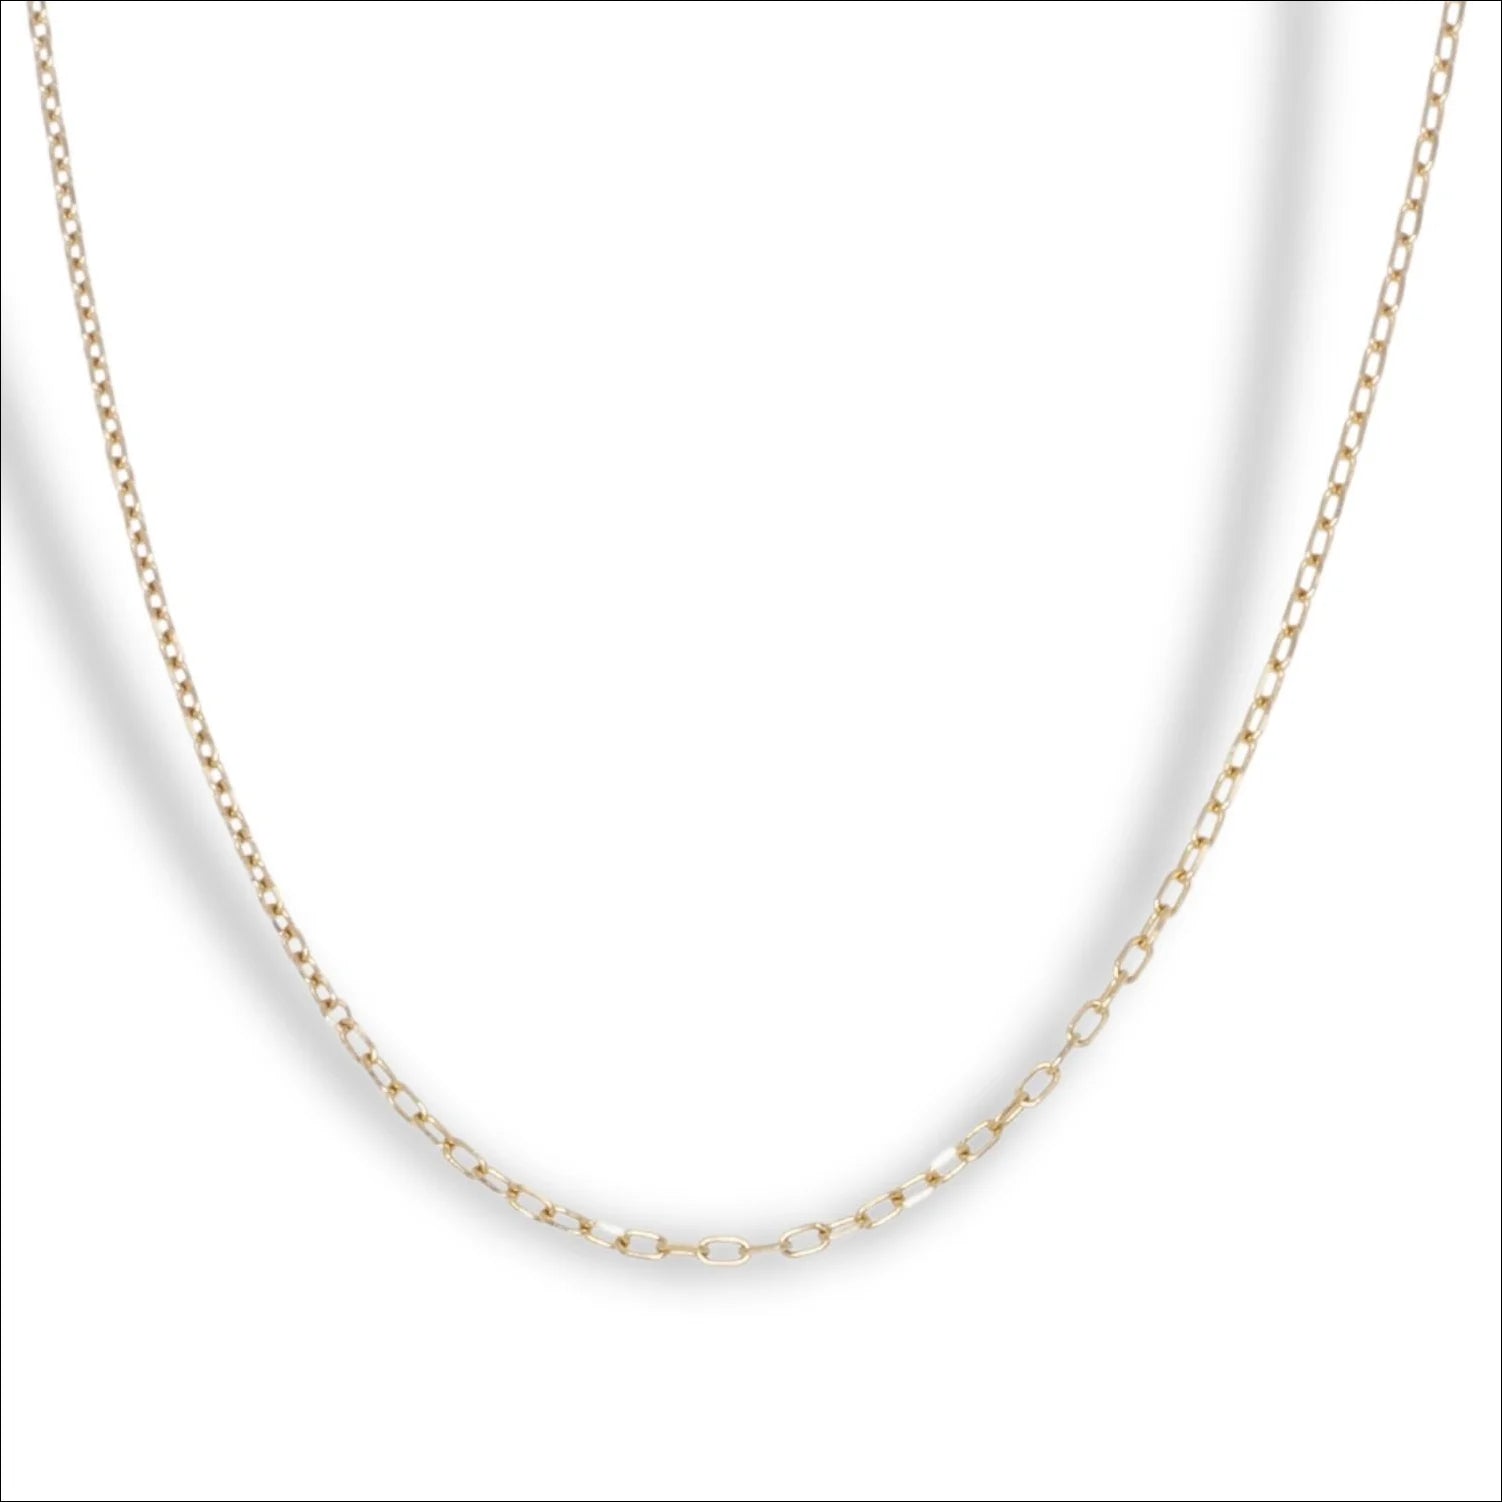 Delicate 18k gold chain | Chains